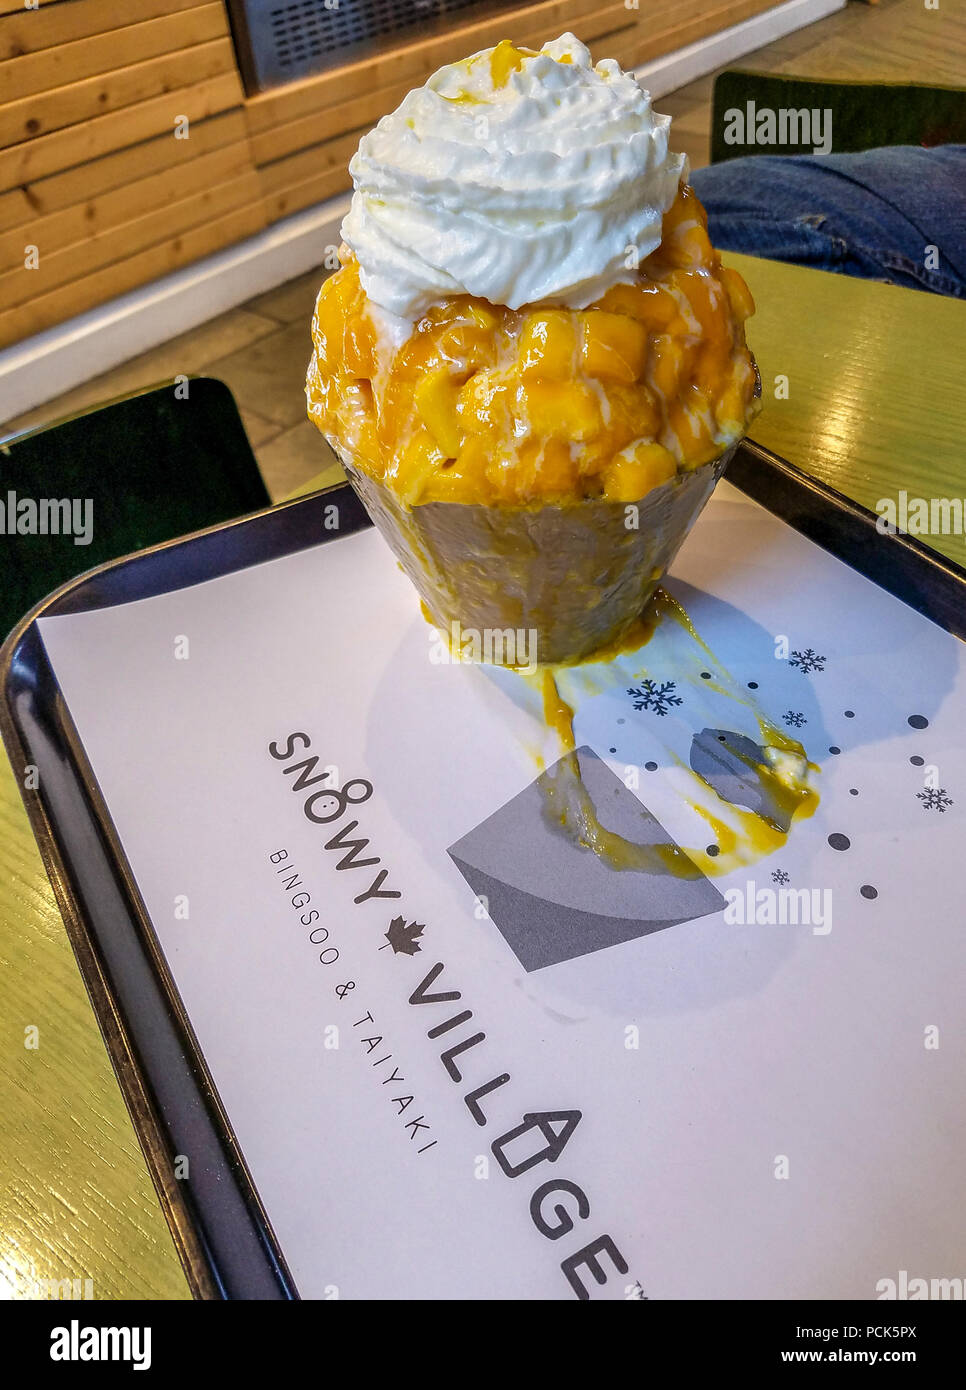 Mango shave ice also called bingsoo at Korean shave ice shop in Richmond, BC, Canada. Sweet condensed milk is added to shaved ice and topped with fruit and whipped cream. Stock Photo